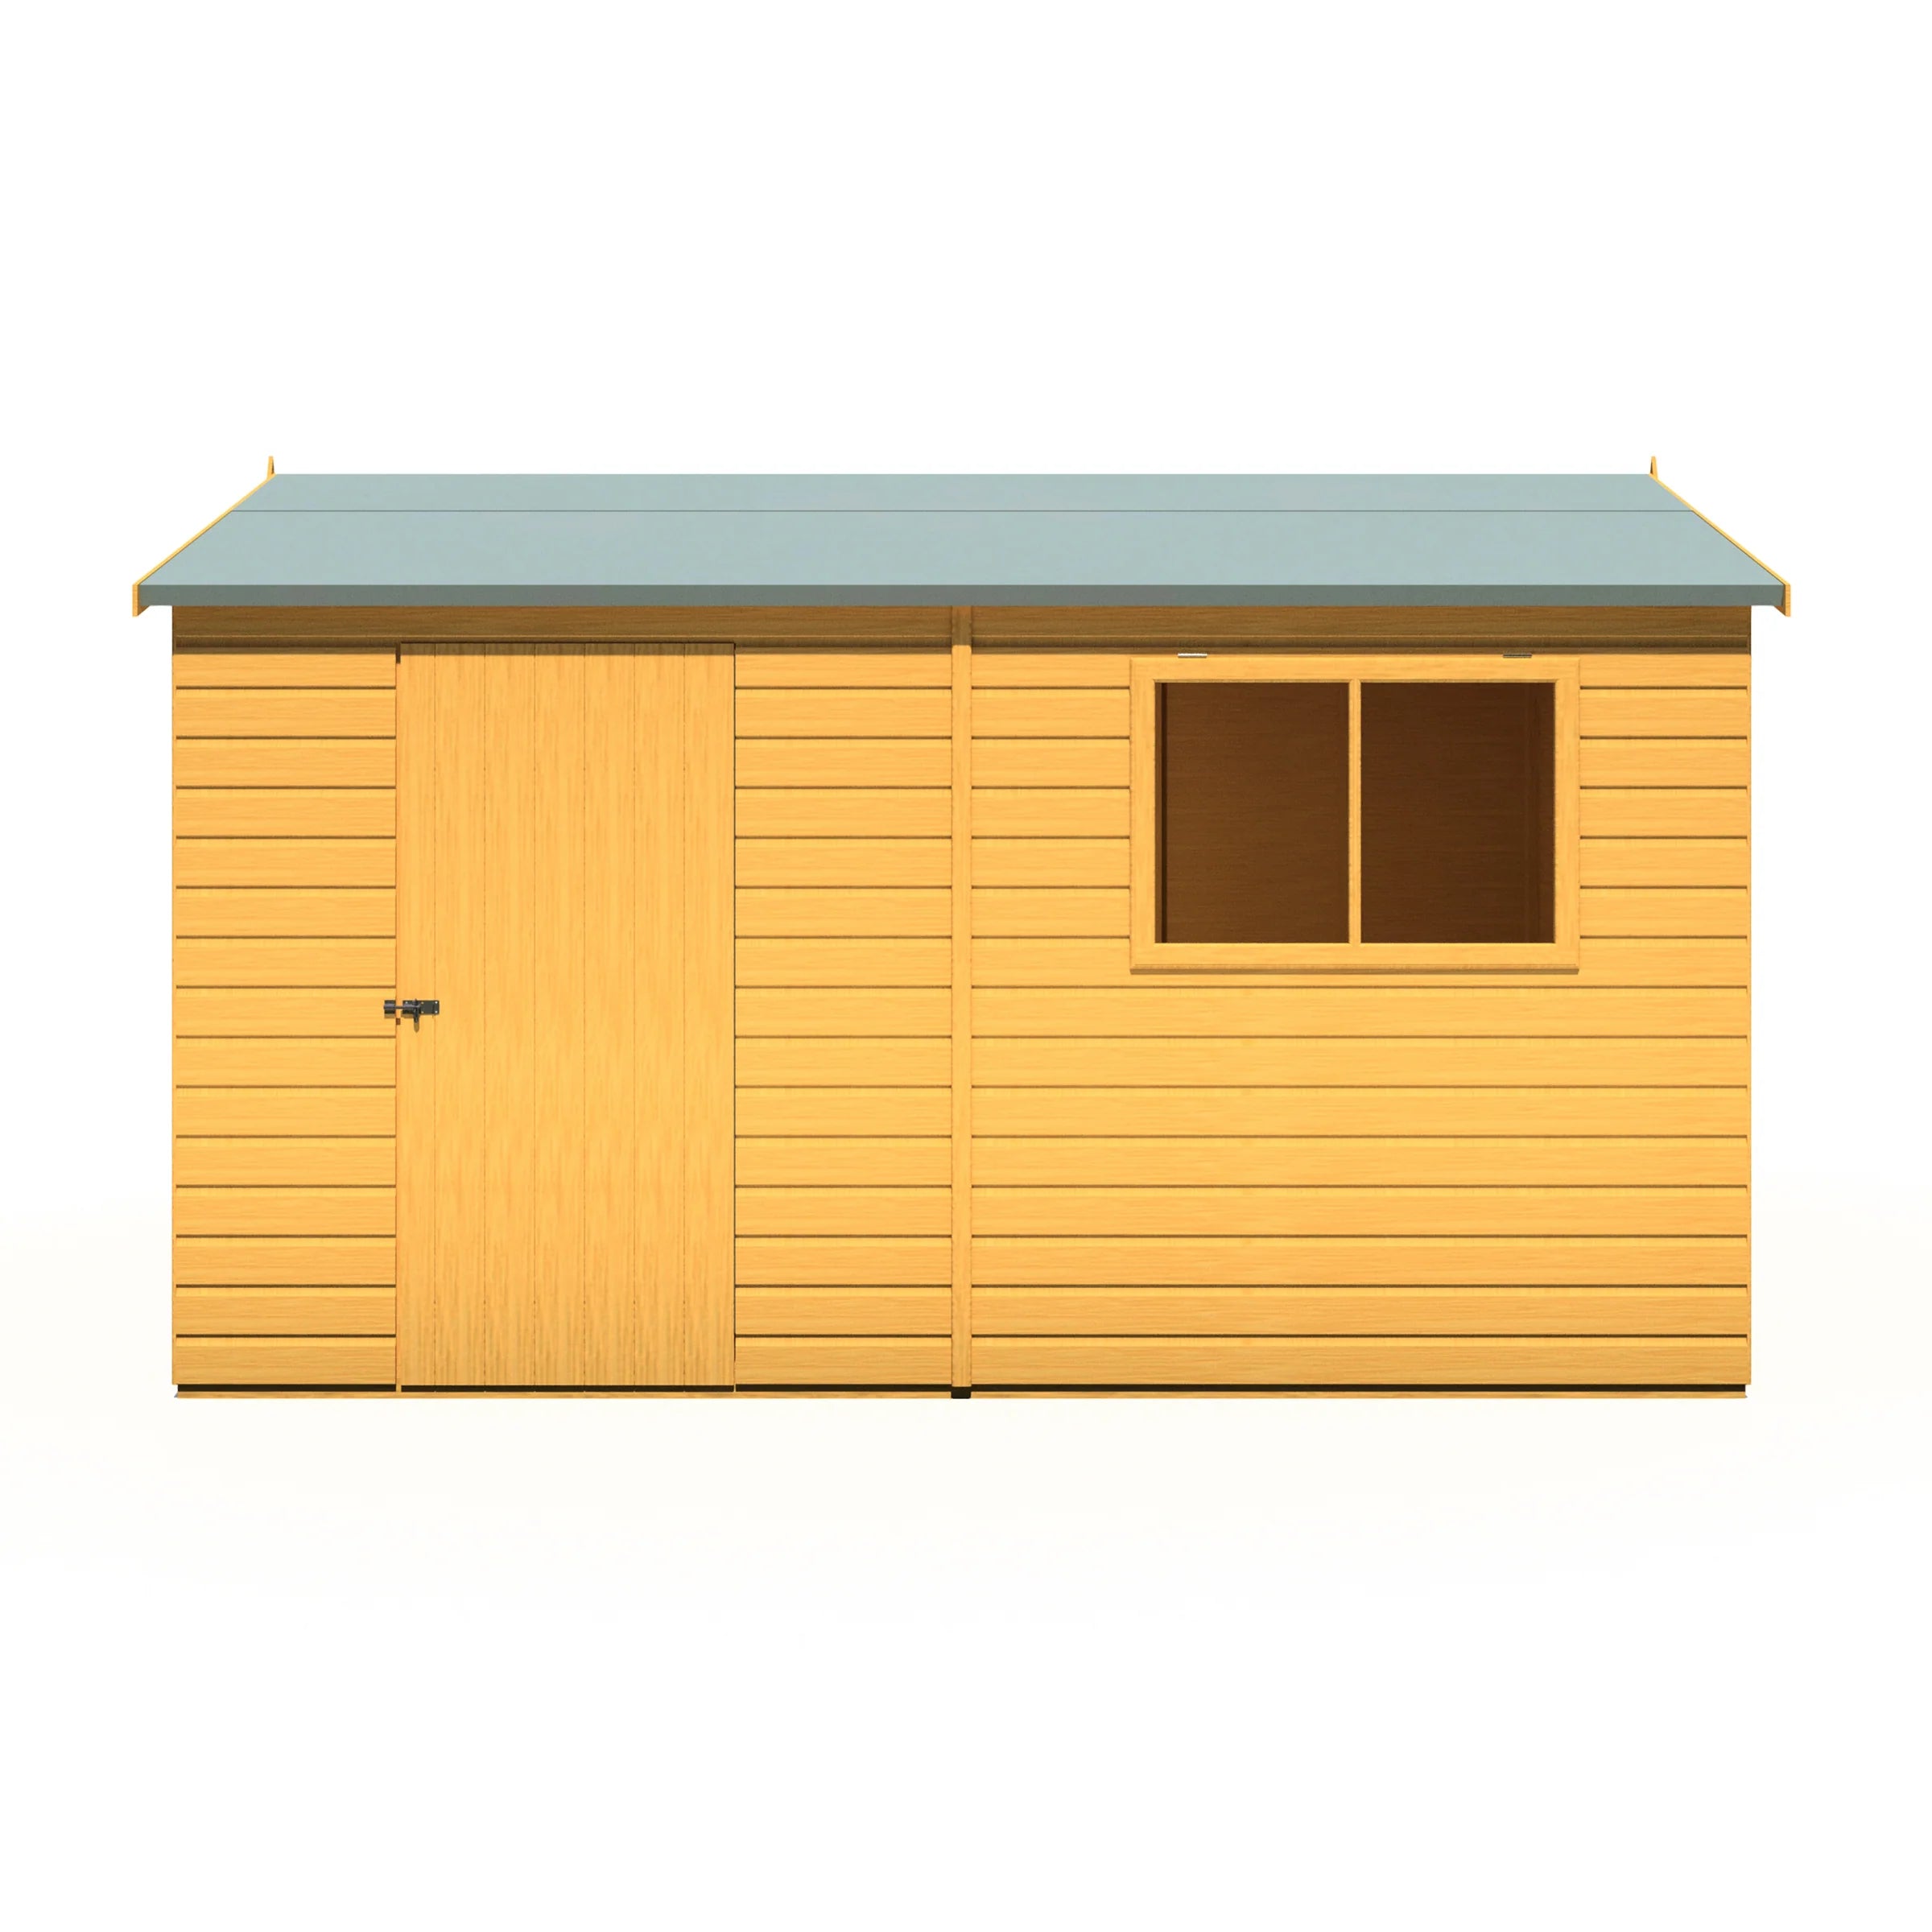 Shire Lewis Reverse Apex Style D Single Door Garden Shed 12x8